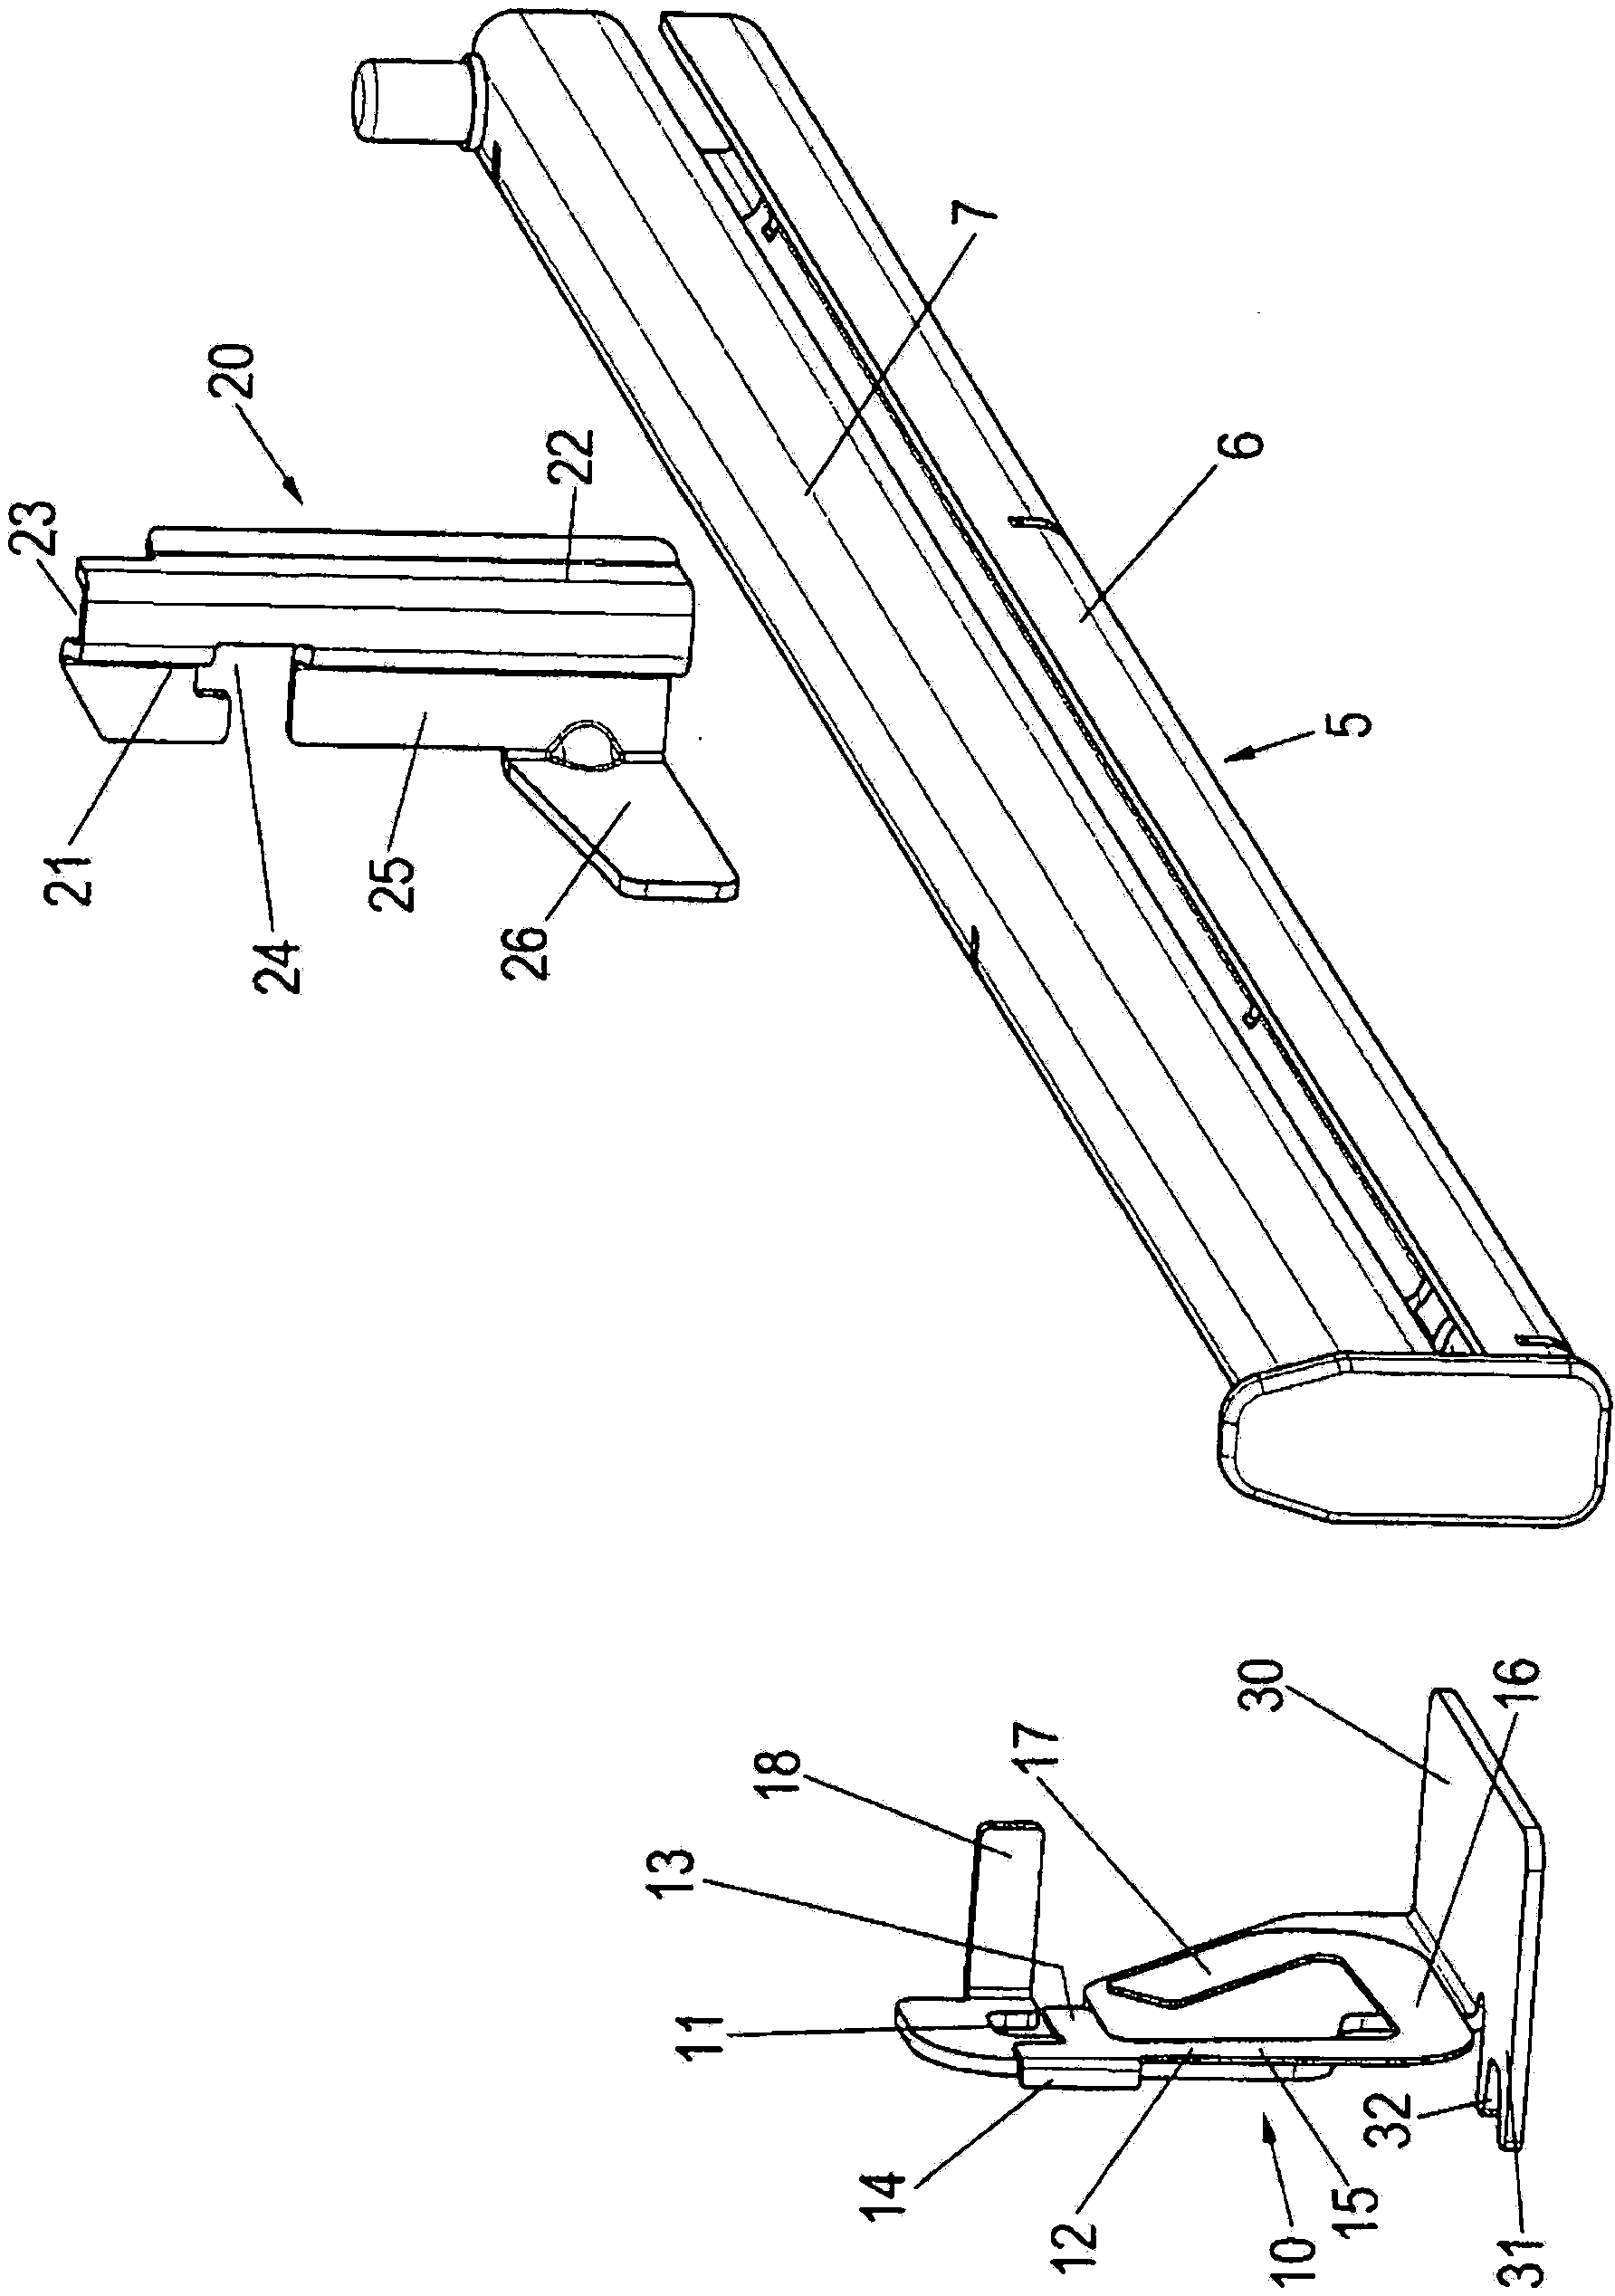 Connecting device for fixing a pull-out guide to a side grate